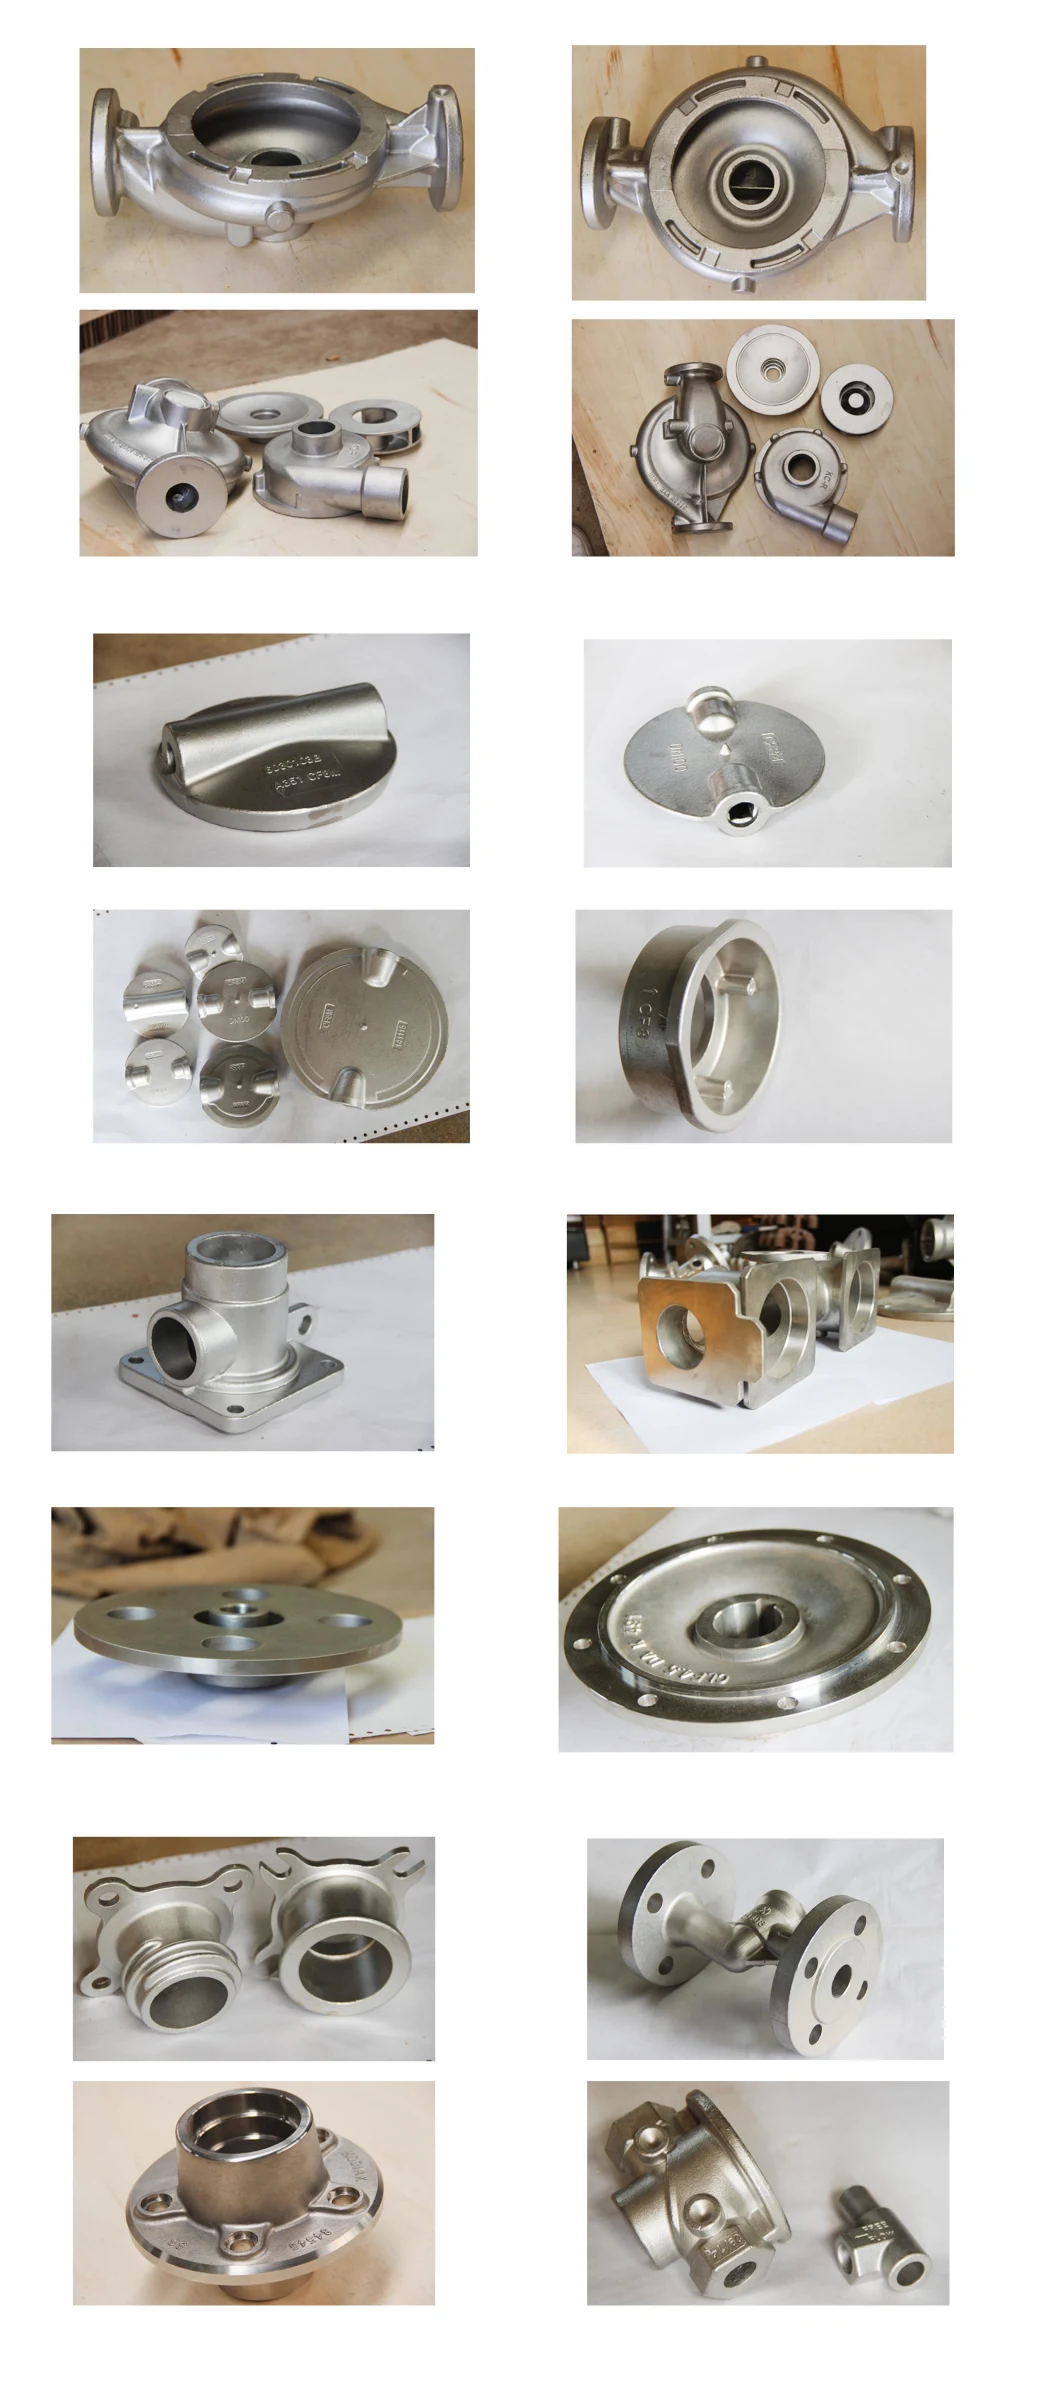 OEM Stainless Steel Investment Casting Engineering & Construction Machinery Hardware Stainless Steel Spare Parts